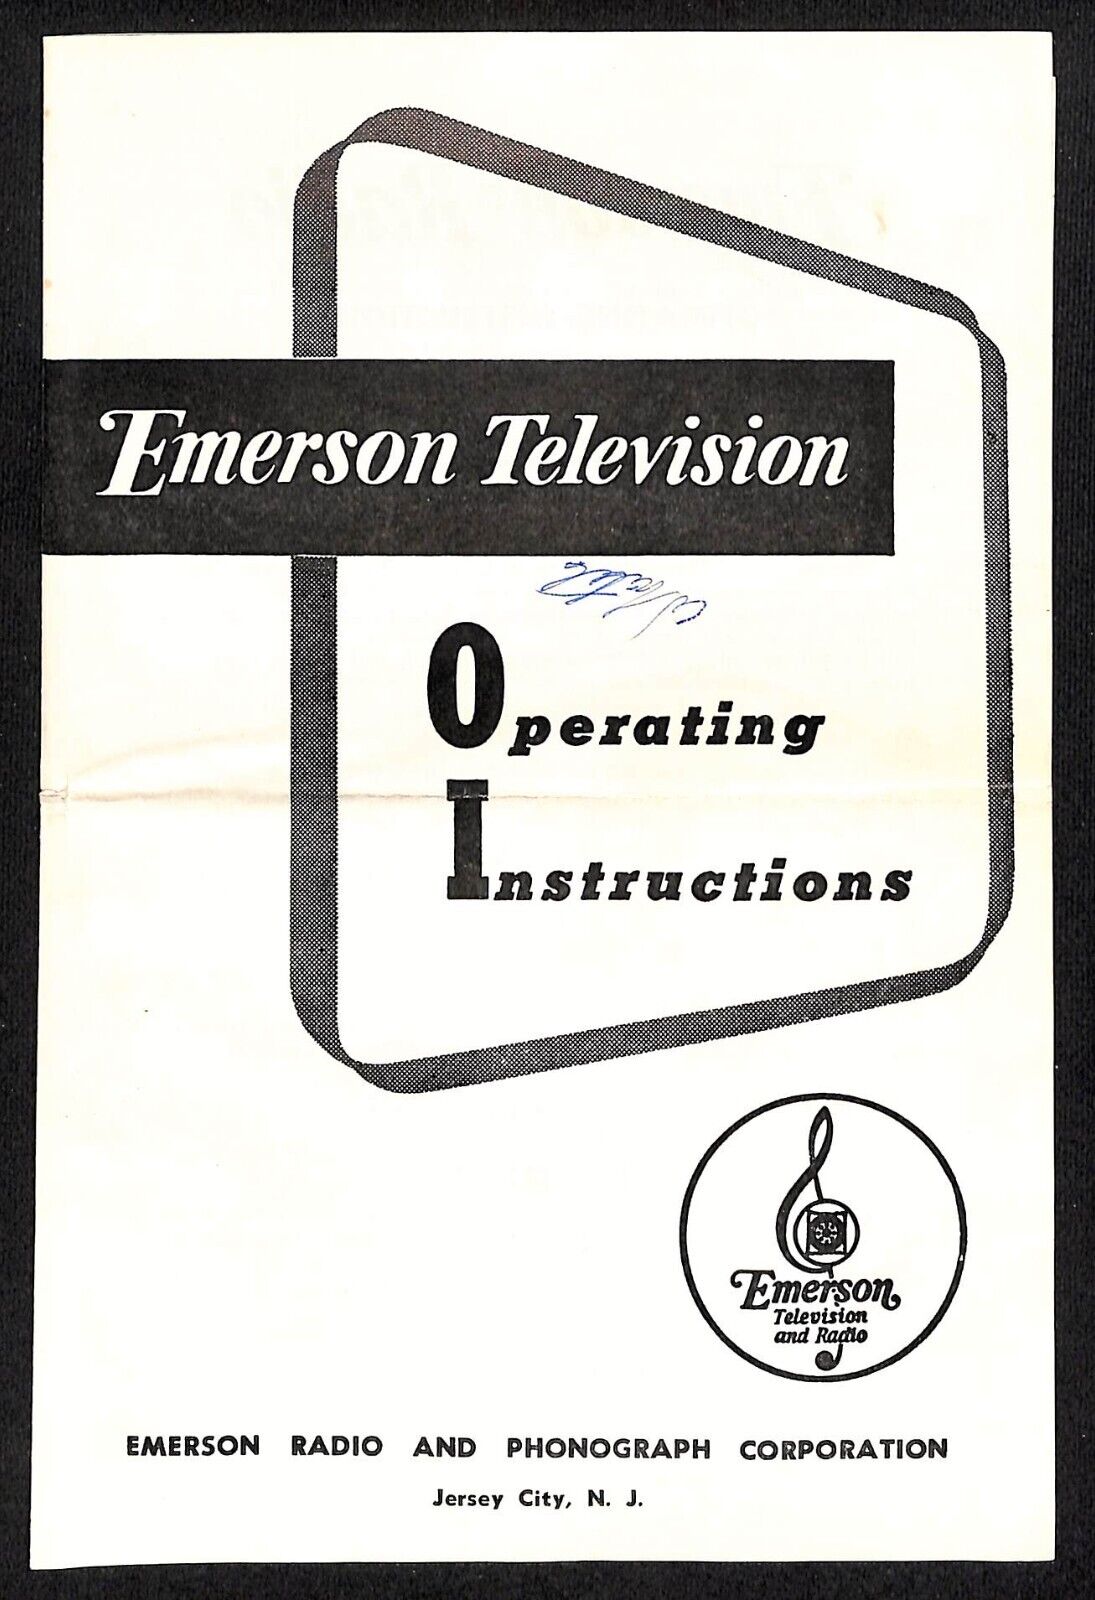 Emerson Television Operating Instruction Manual / Pamphlet c1950\'s? 7pp + Env.